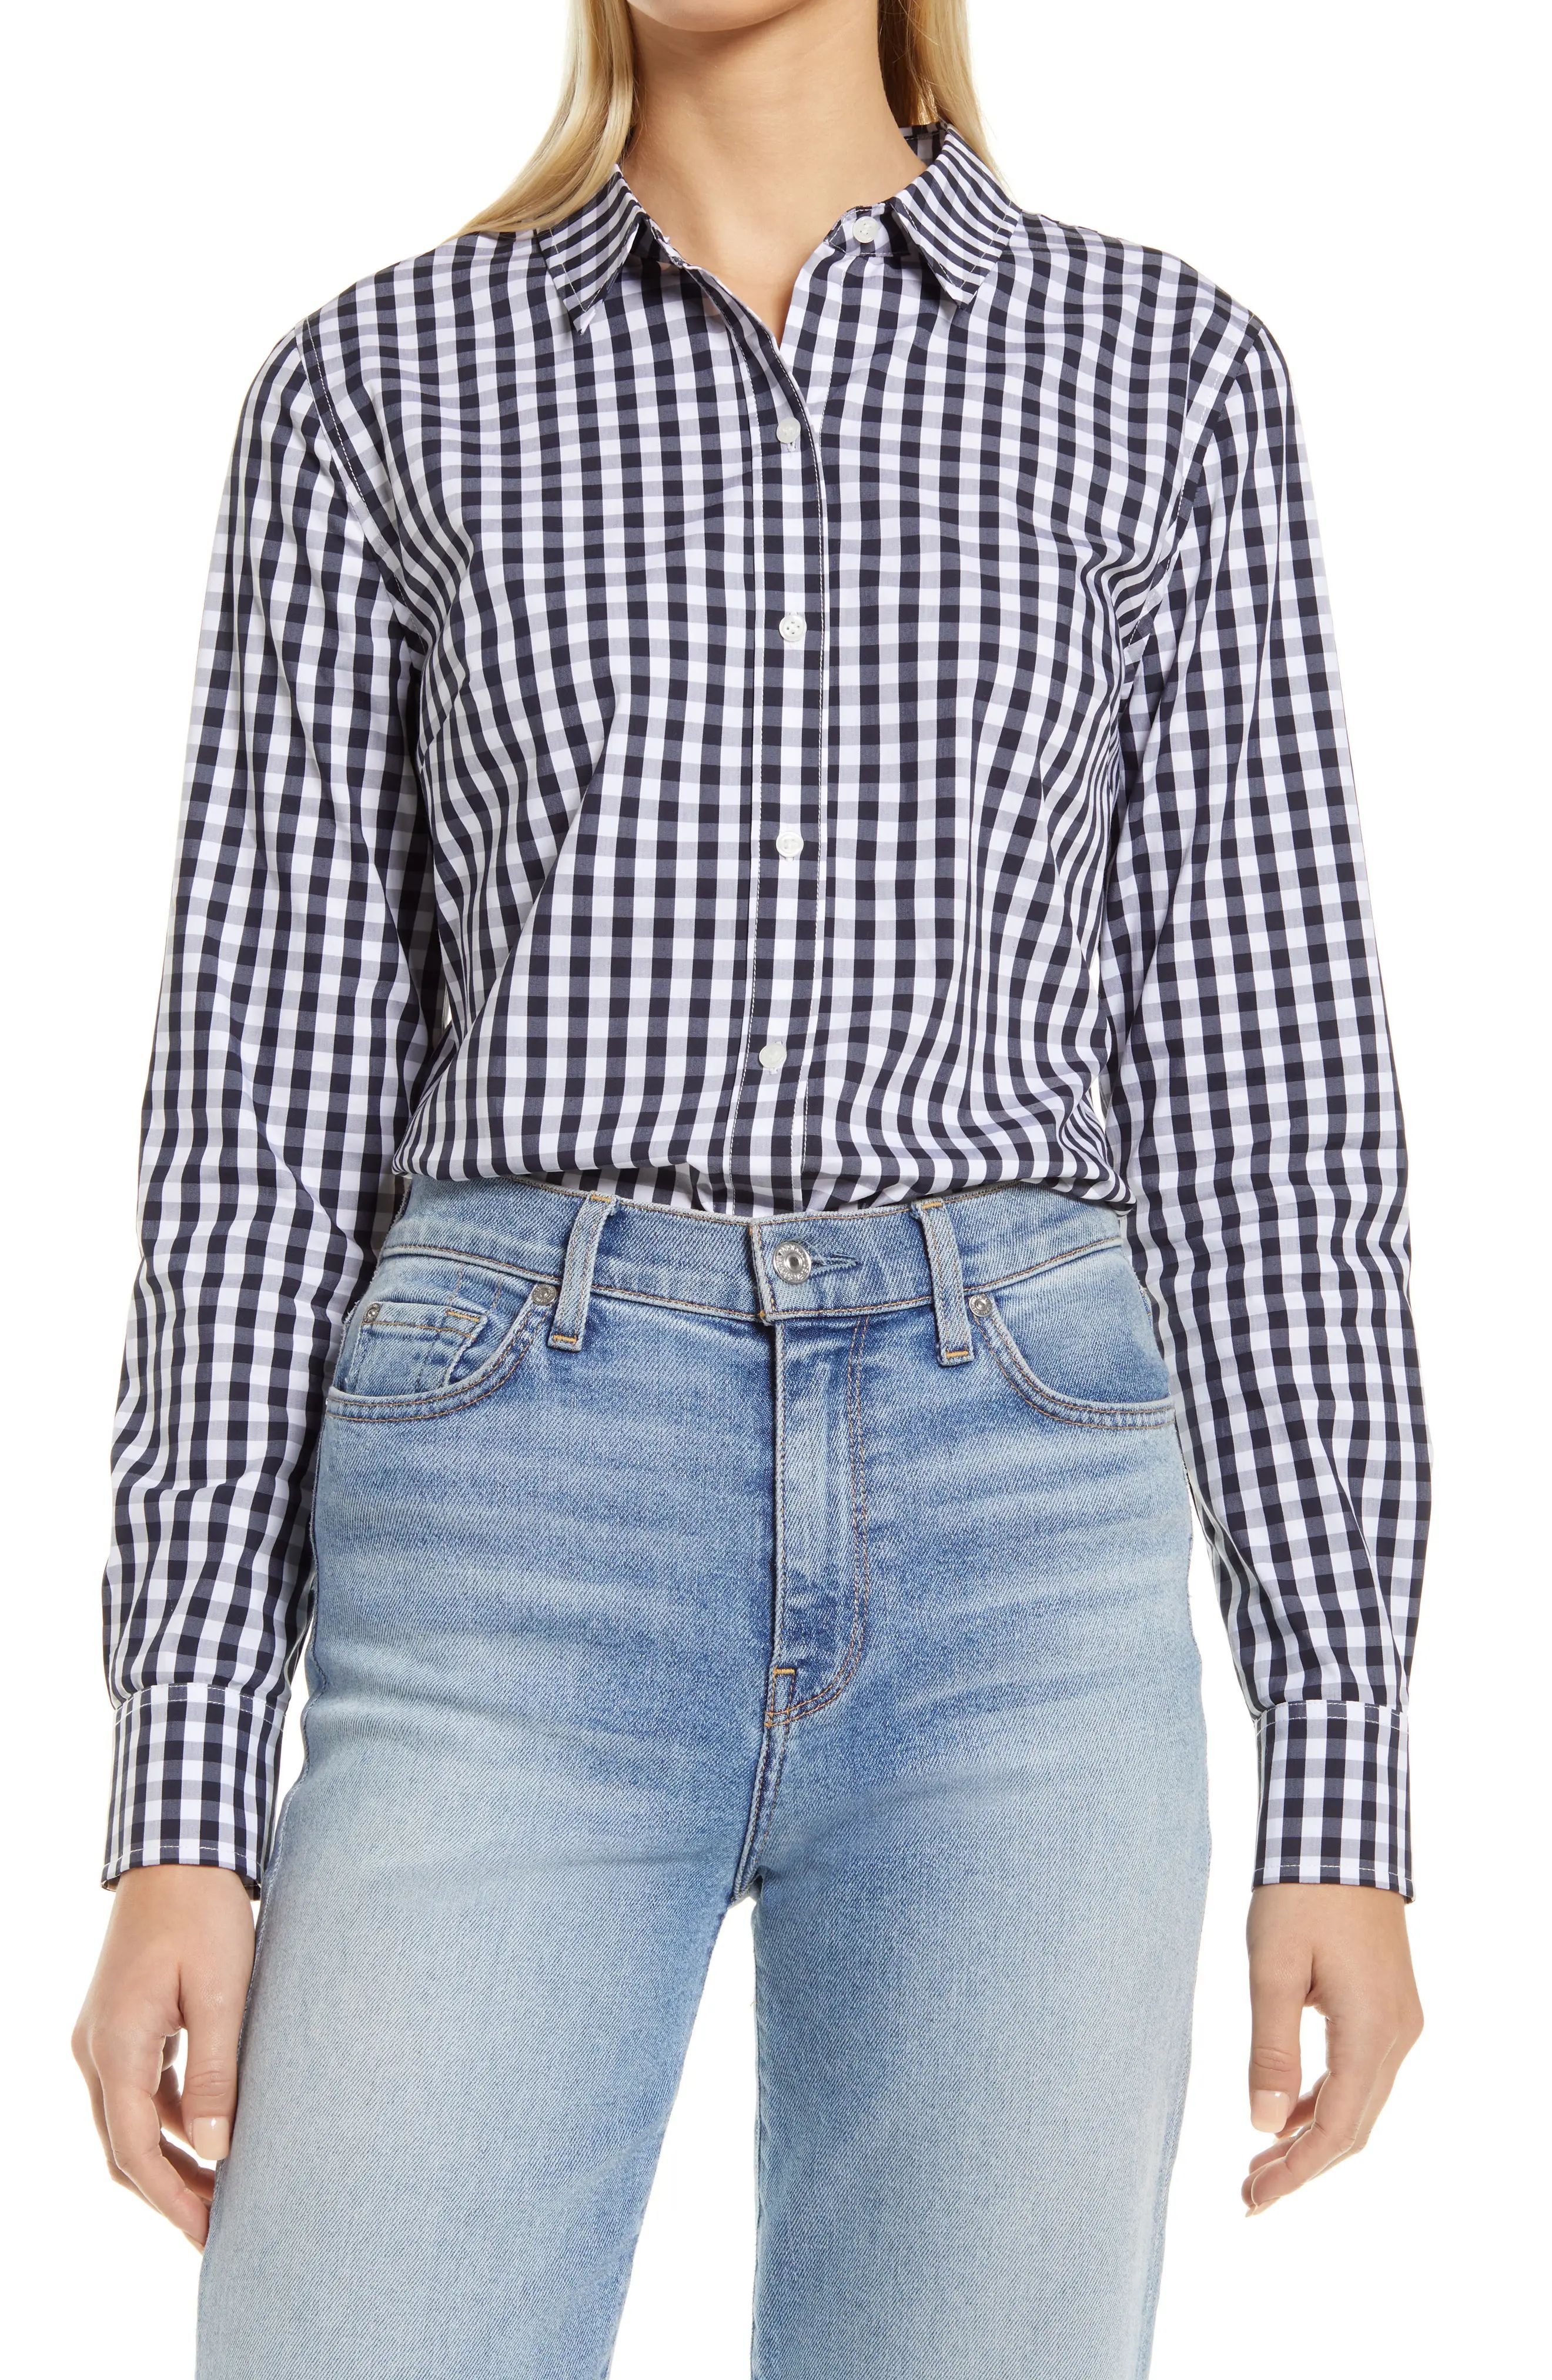 Halogen(R) Classic Poplin Button-Up Shirt, Size Xx-Small in Navy/White Gingham at Nordstrom | Nordstrom